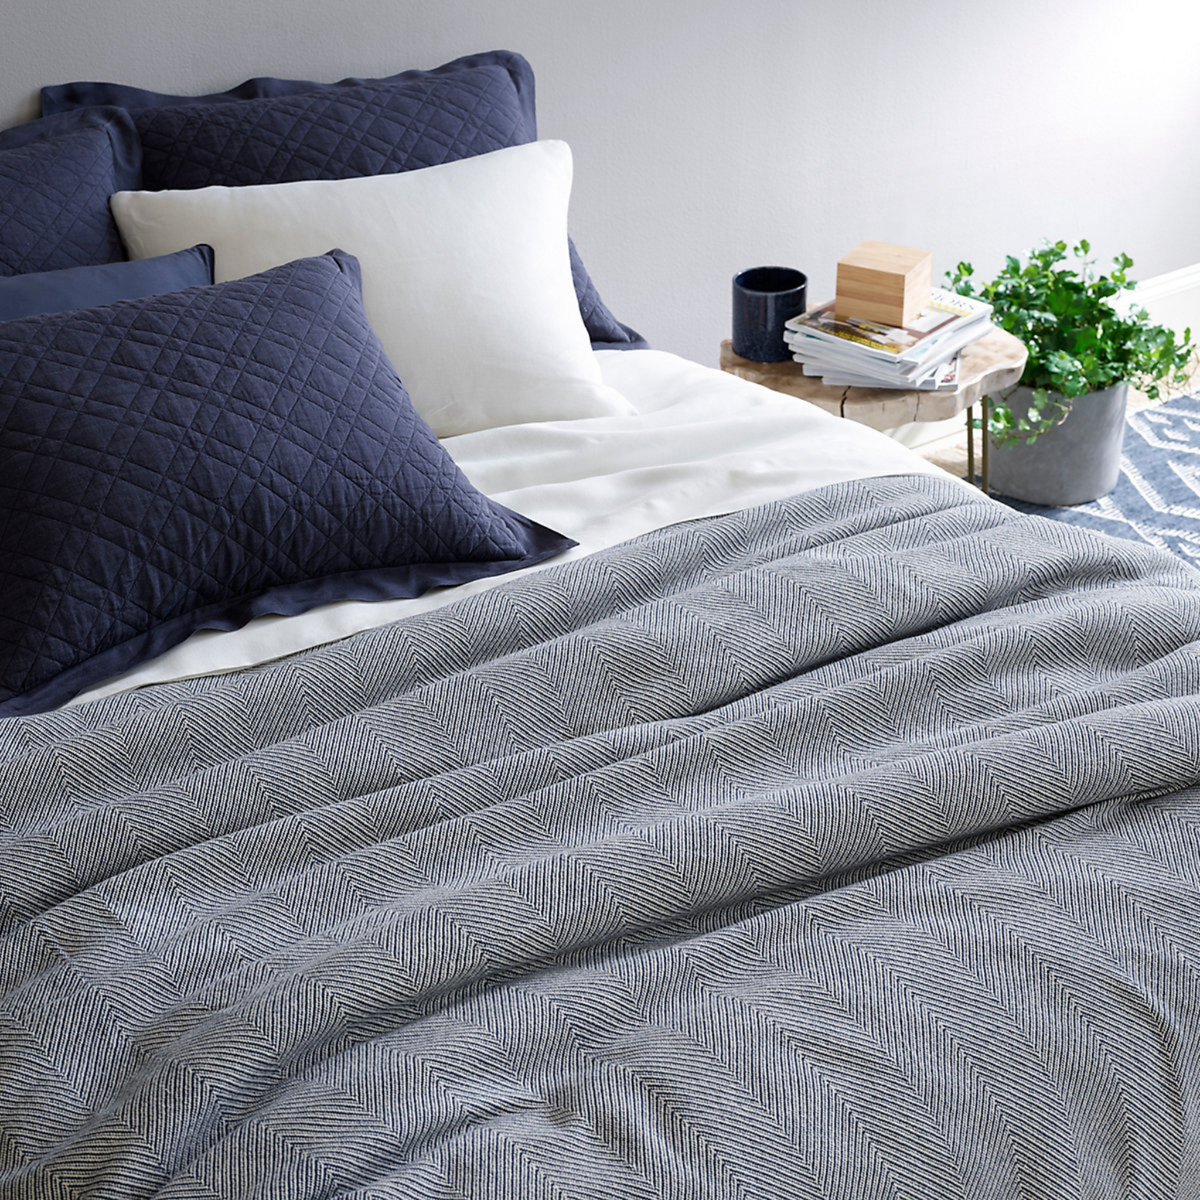 Bed with Pine Cone Hill Herringbone Blanket in Navy/Ivory Color